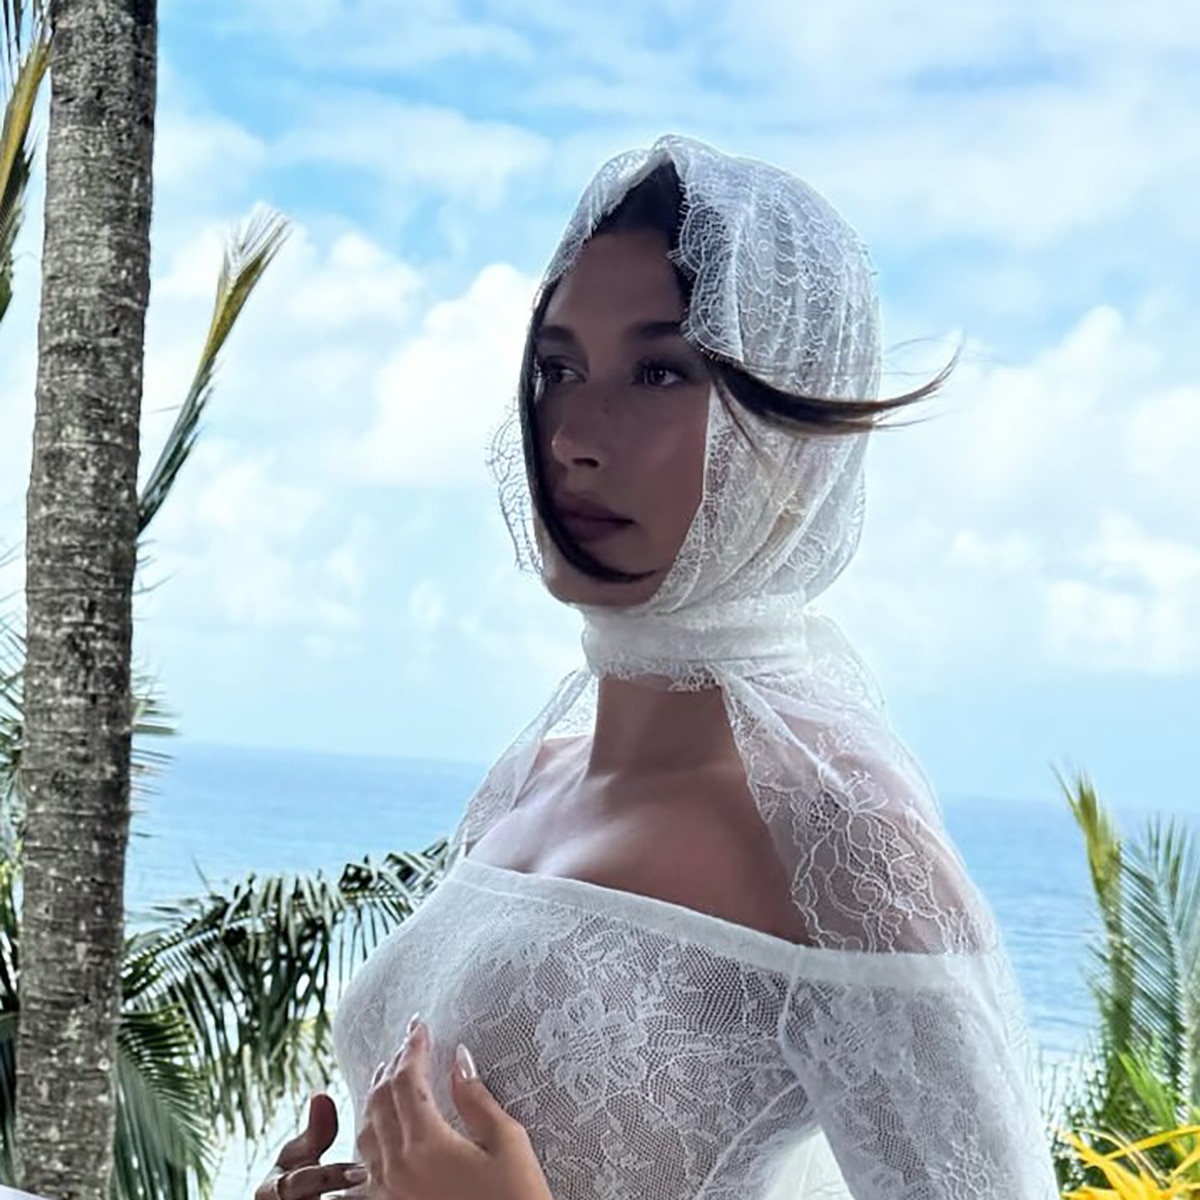 
                        Pregnant Hailey Bieber Shares Behind-the-Scenes Maternity Shoot Photo
                